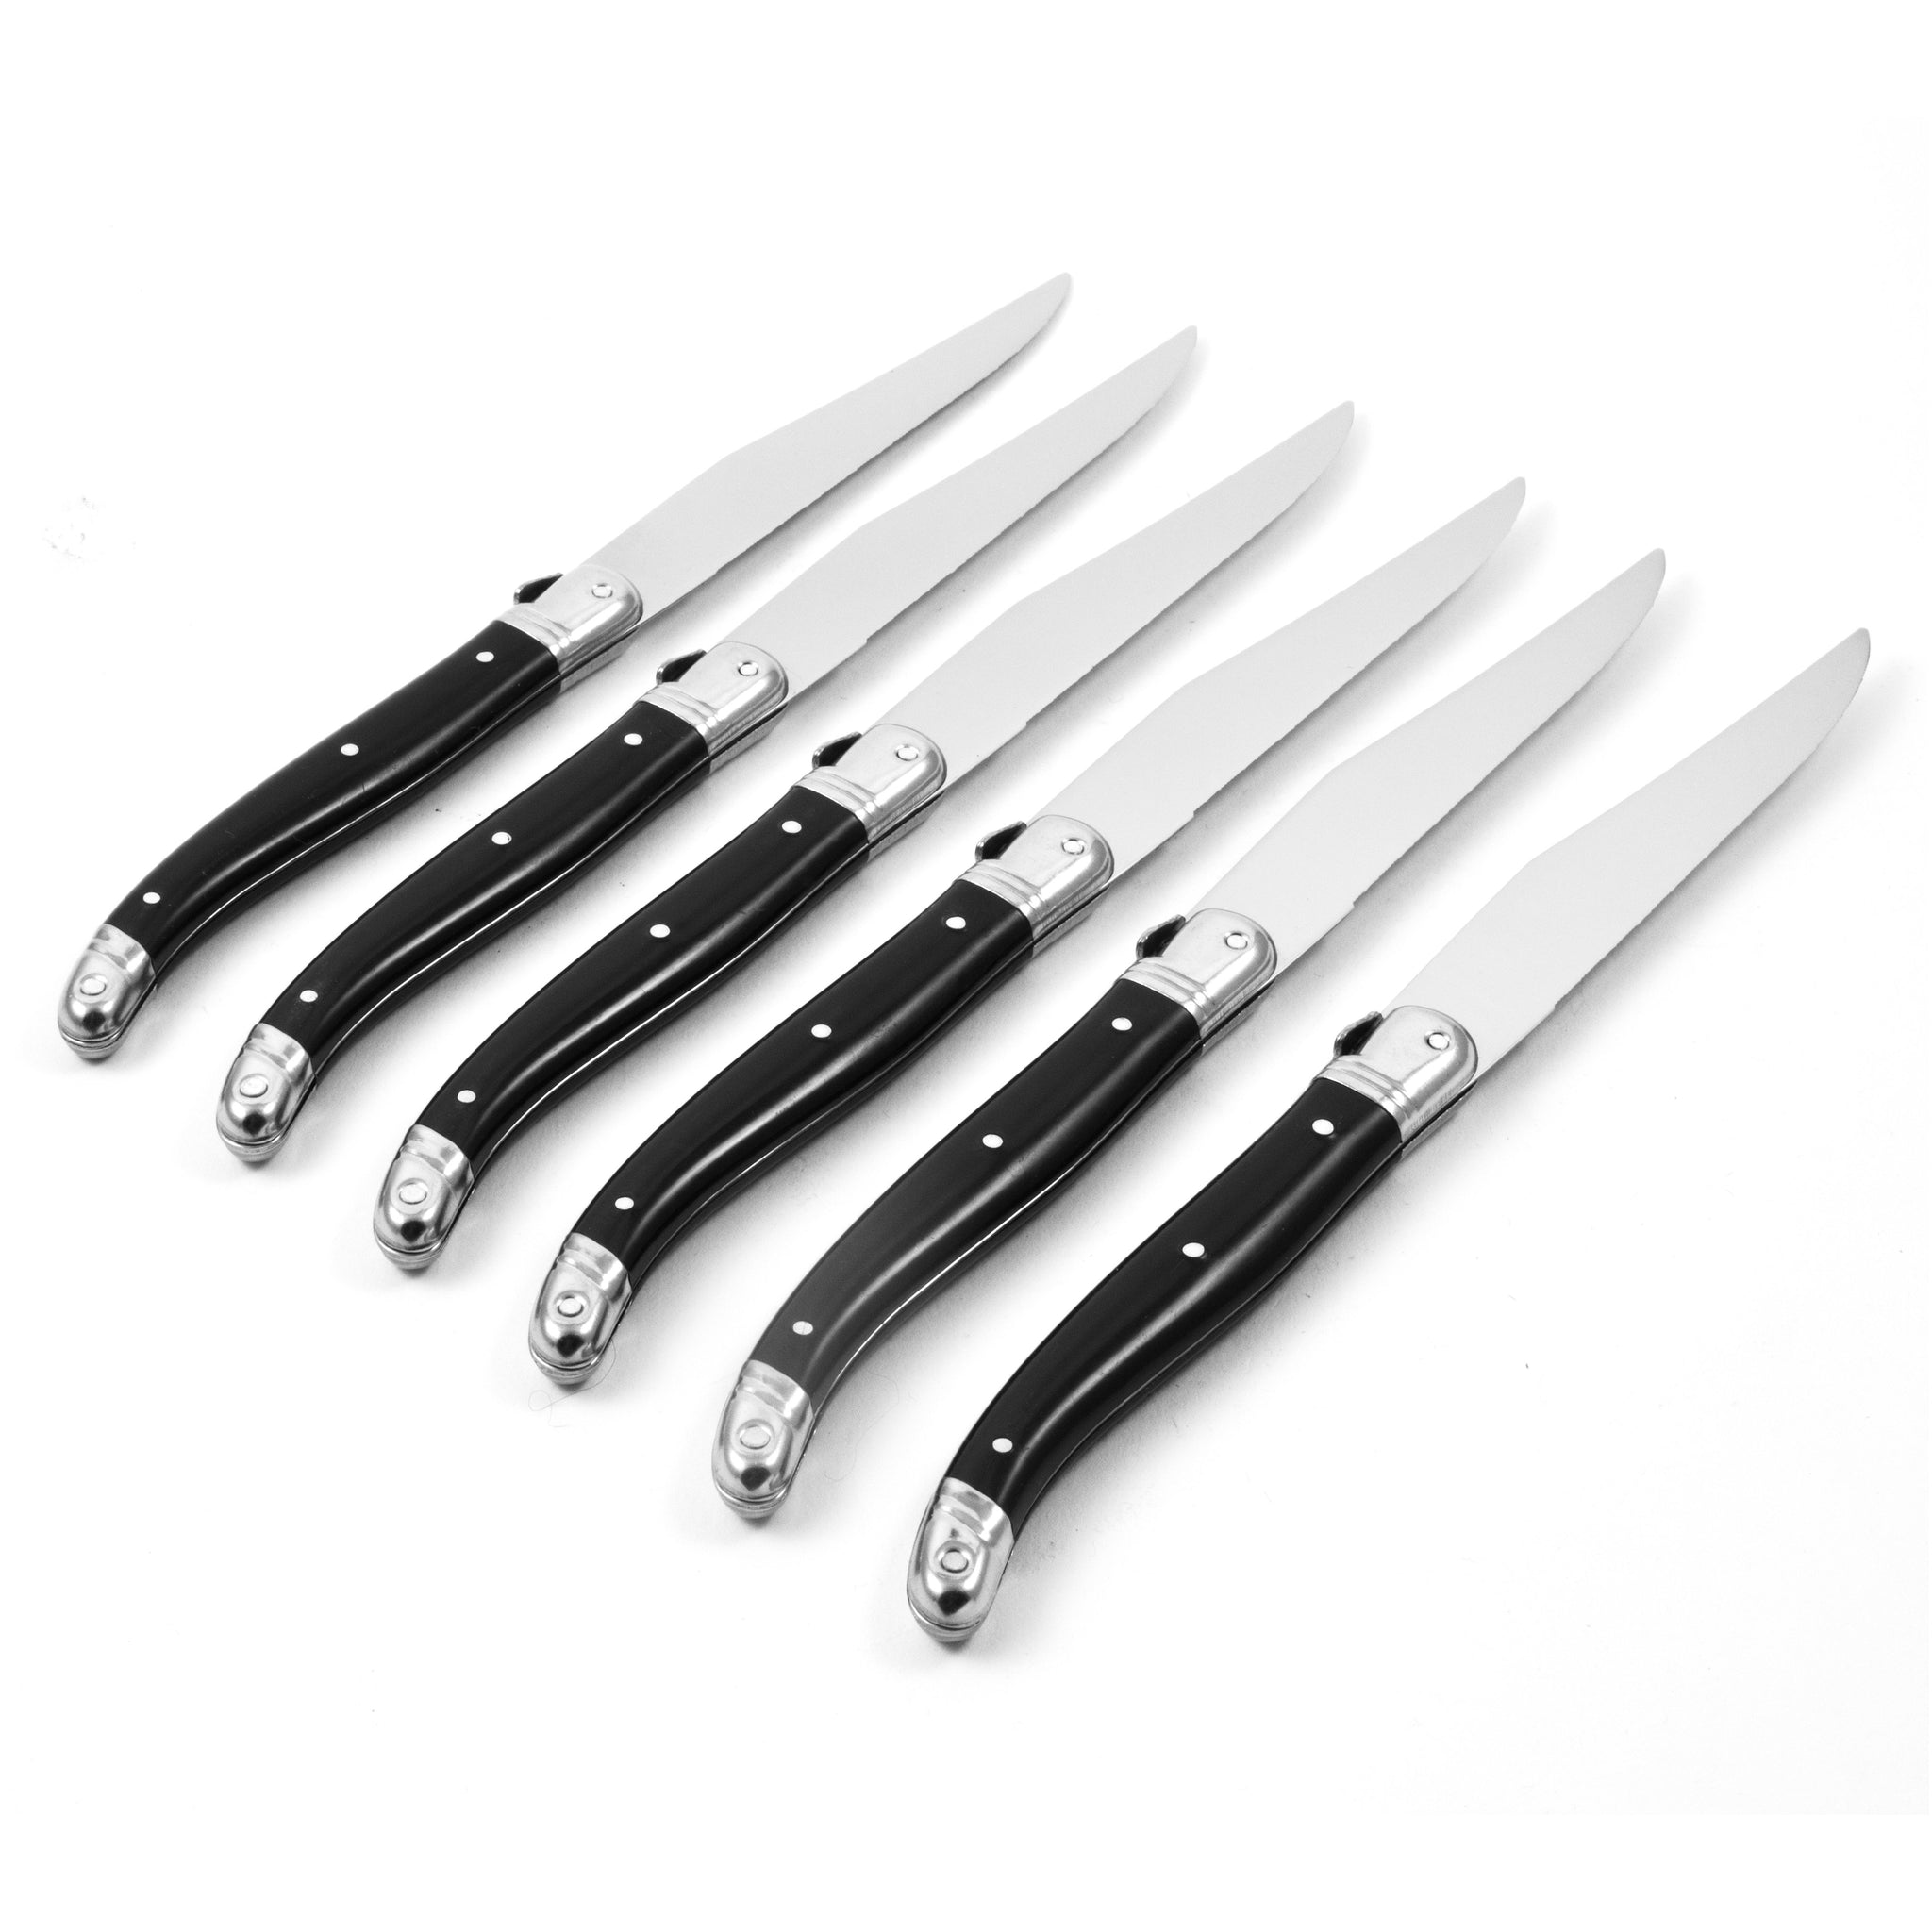 French Home Set of 6 Laguiole Connoisseur Assorted Wood Steak Knives(L –  frenchhome